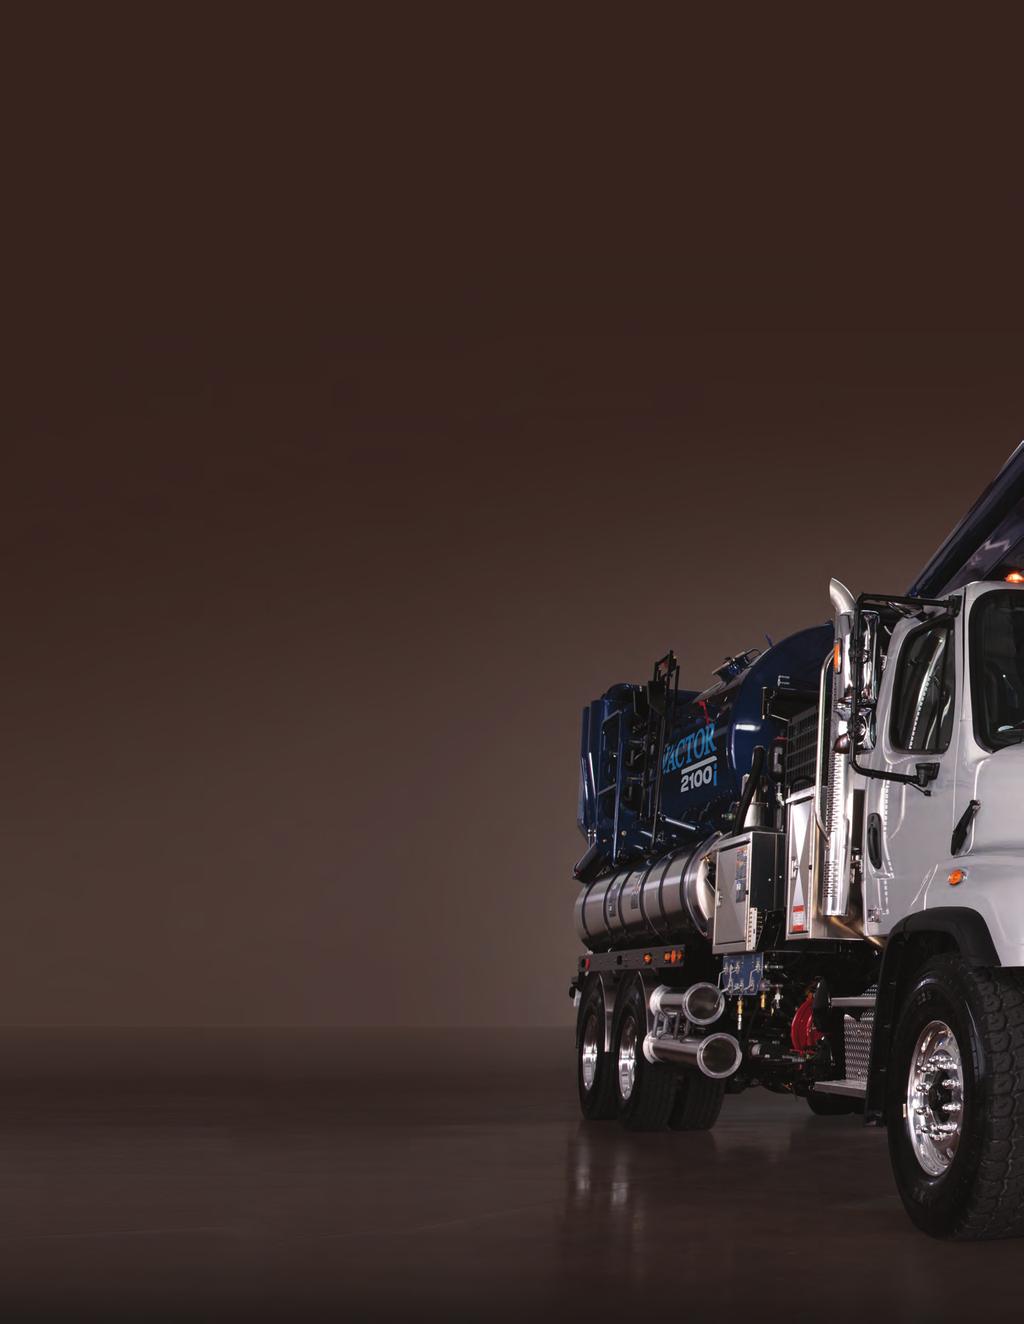 UP AND DOWN, FRONT AND BACK THE VACTOR 2100i OFFERS YOU GREATER OPERATING EASE AND EFFICIENCY.